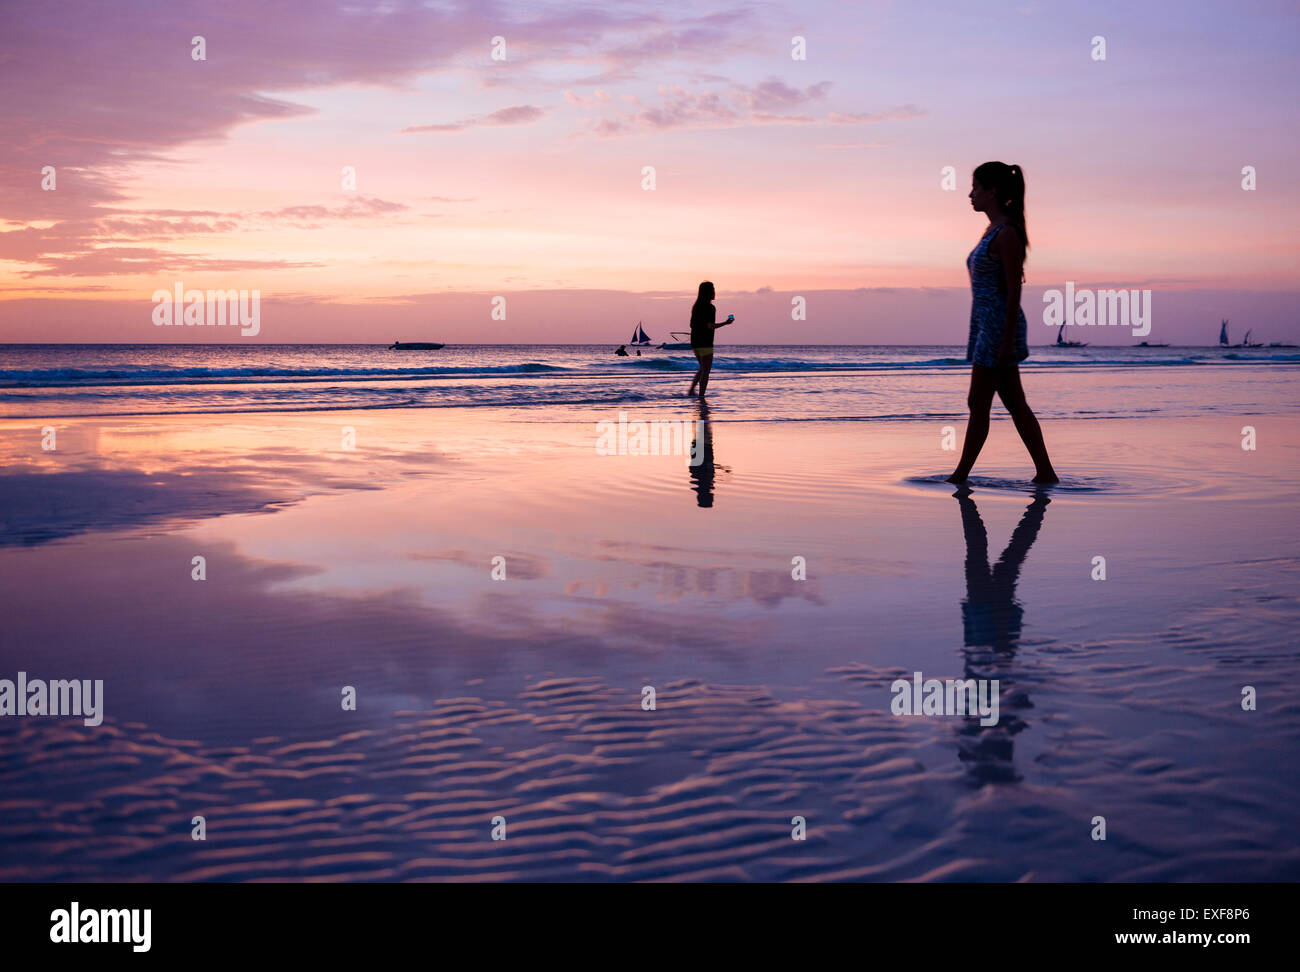 Silhouetted young woman strolling on beach at sunset, Boracay Island, Visayas, Philippines Stock Photo